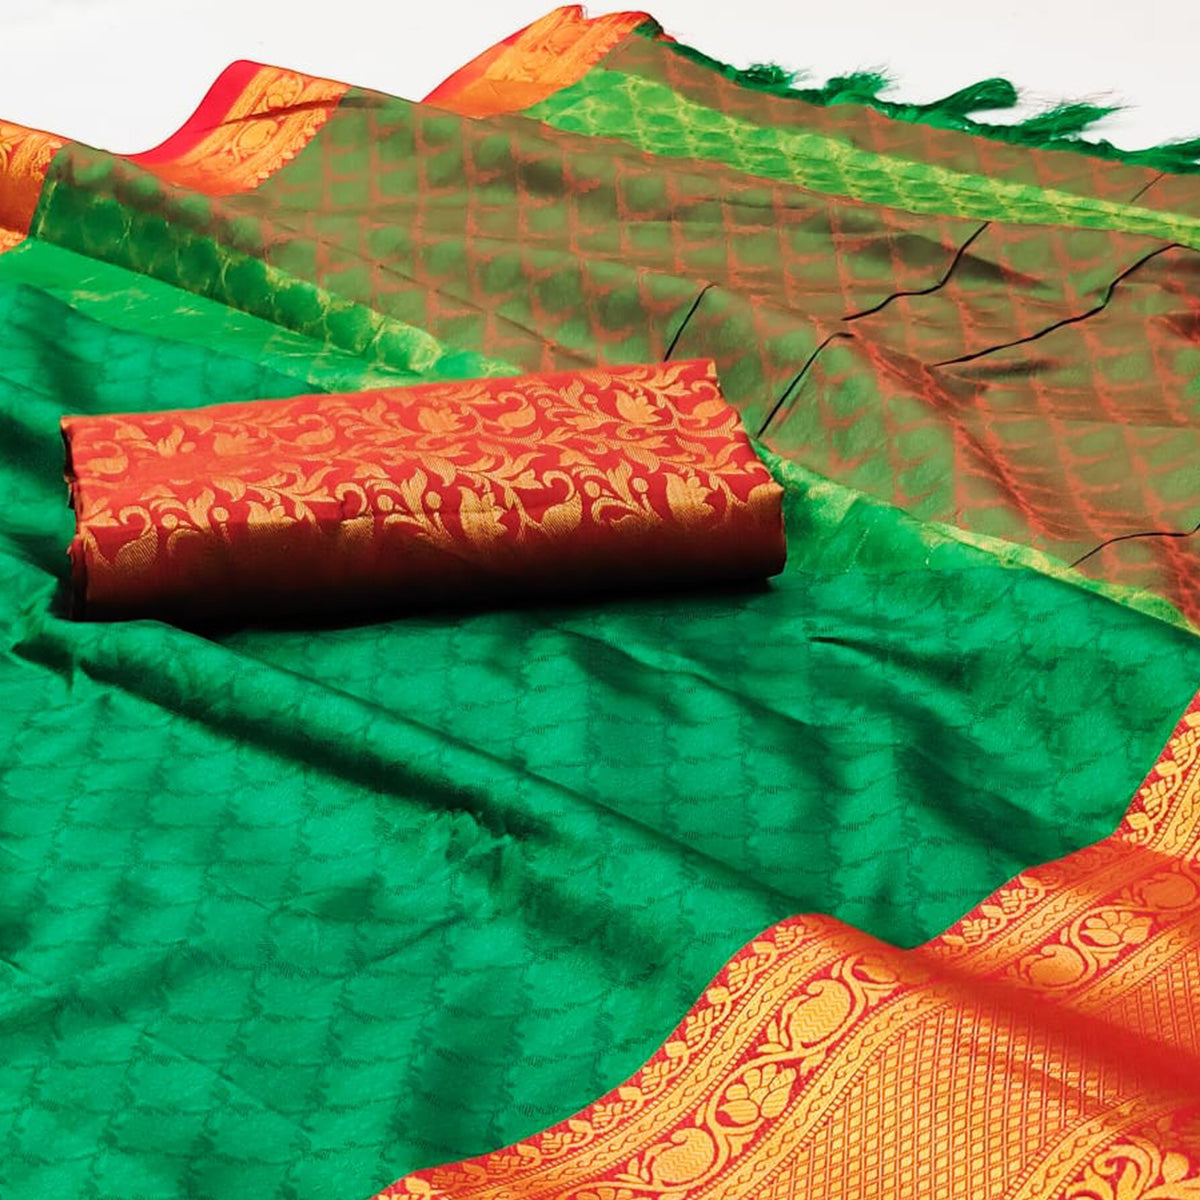 Green Printed And Woven Cotton Silk Saree With Tassels